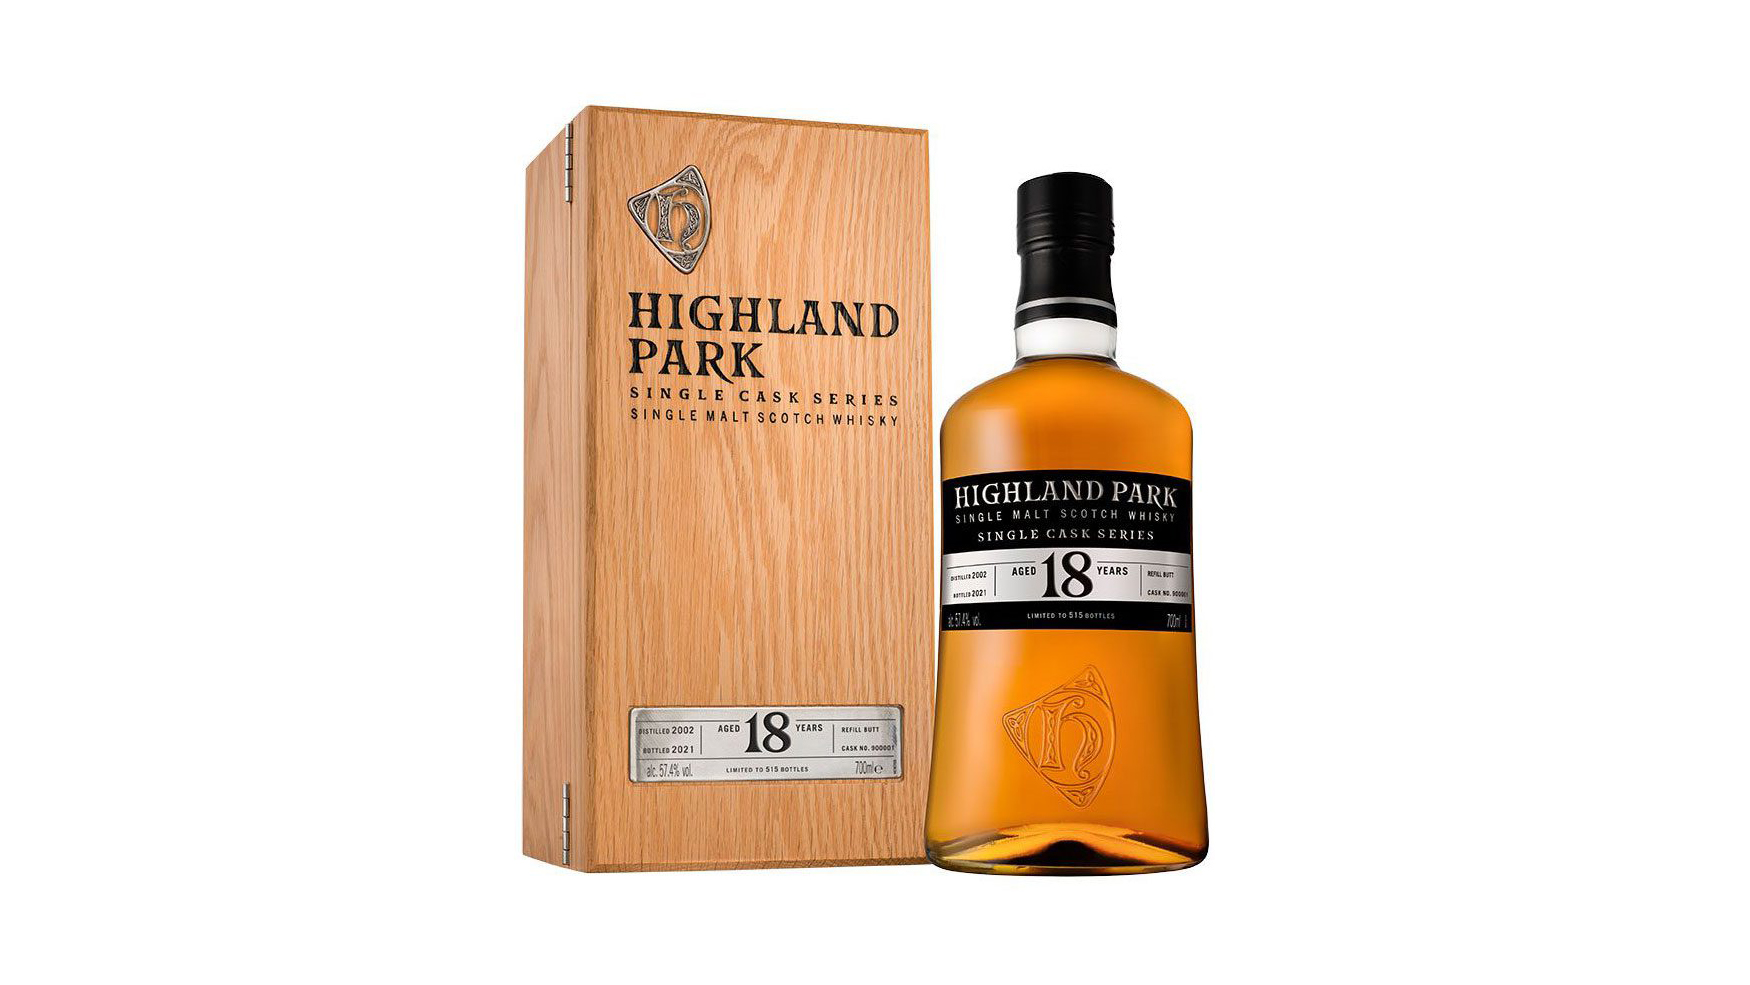 Highland Park Launches Limited-Edition 18-Year-Old Single Cask